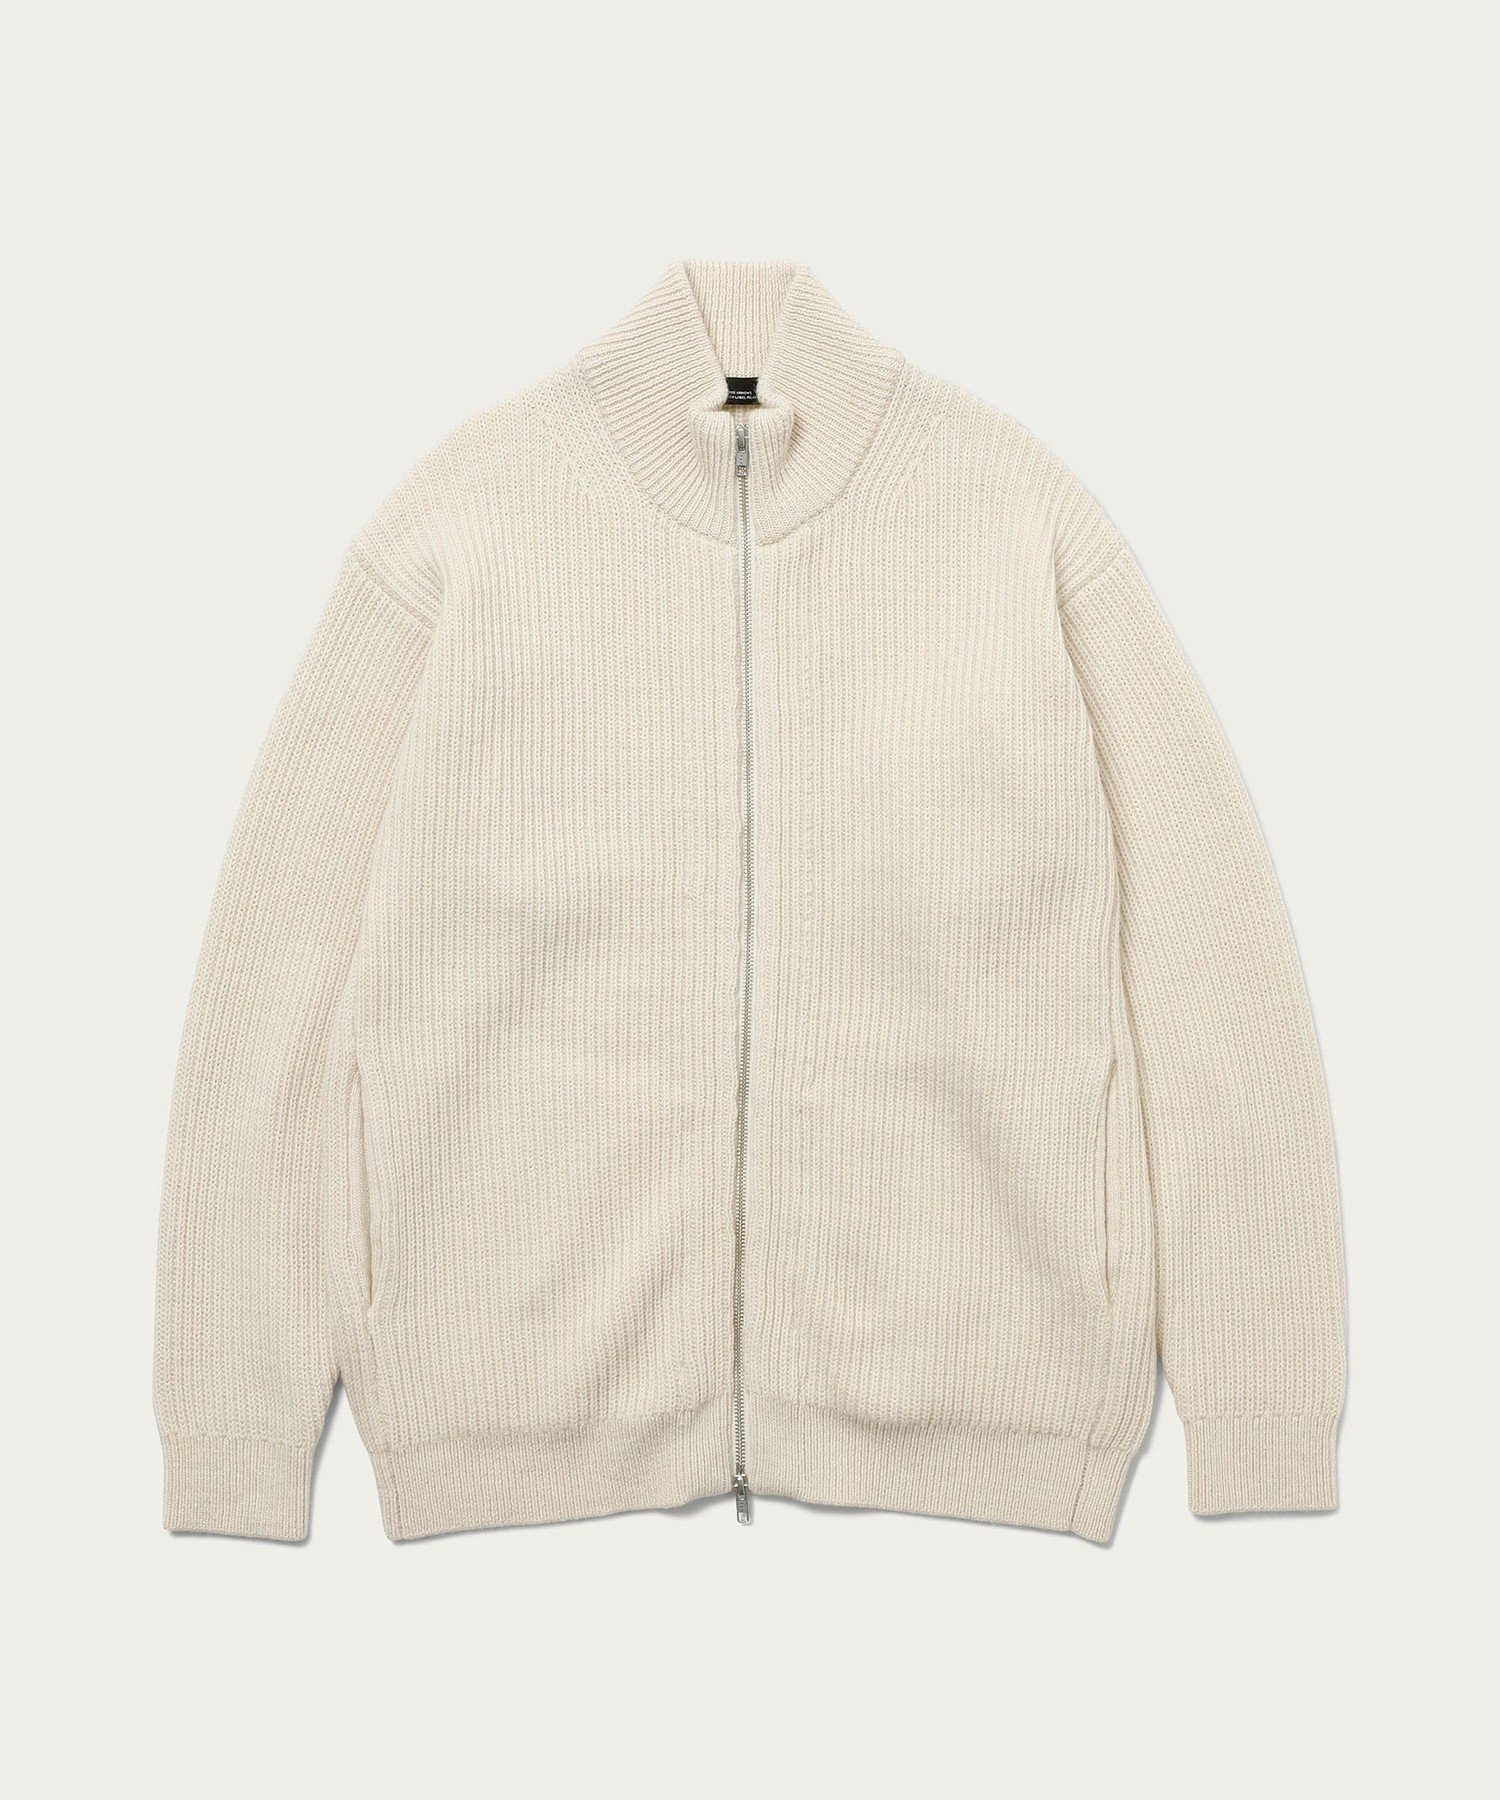 UNITED ARROWS green label relaxing｜ANDEAN/WO ジップ ニット